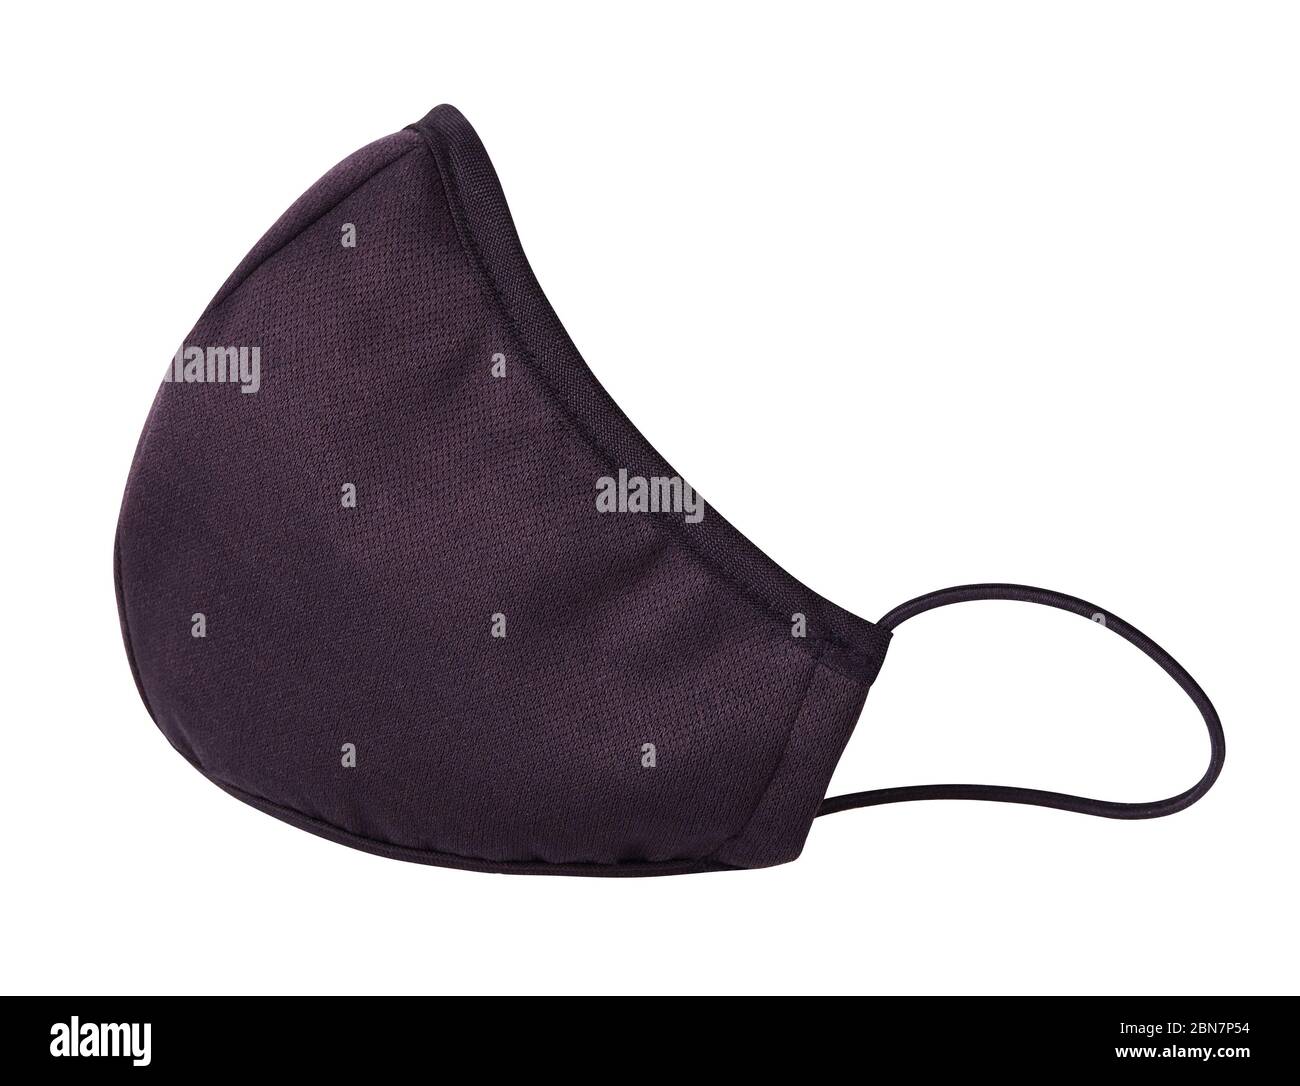 Black fabric facial mask for health protection isolated on white background.  Ear-loop mask to cover the mouth and nose. Stock Photo